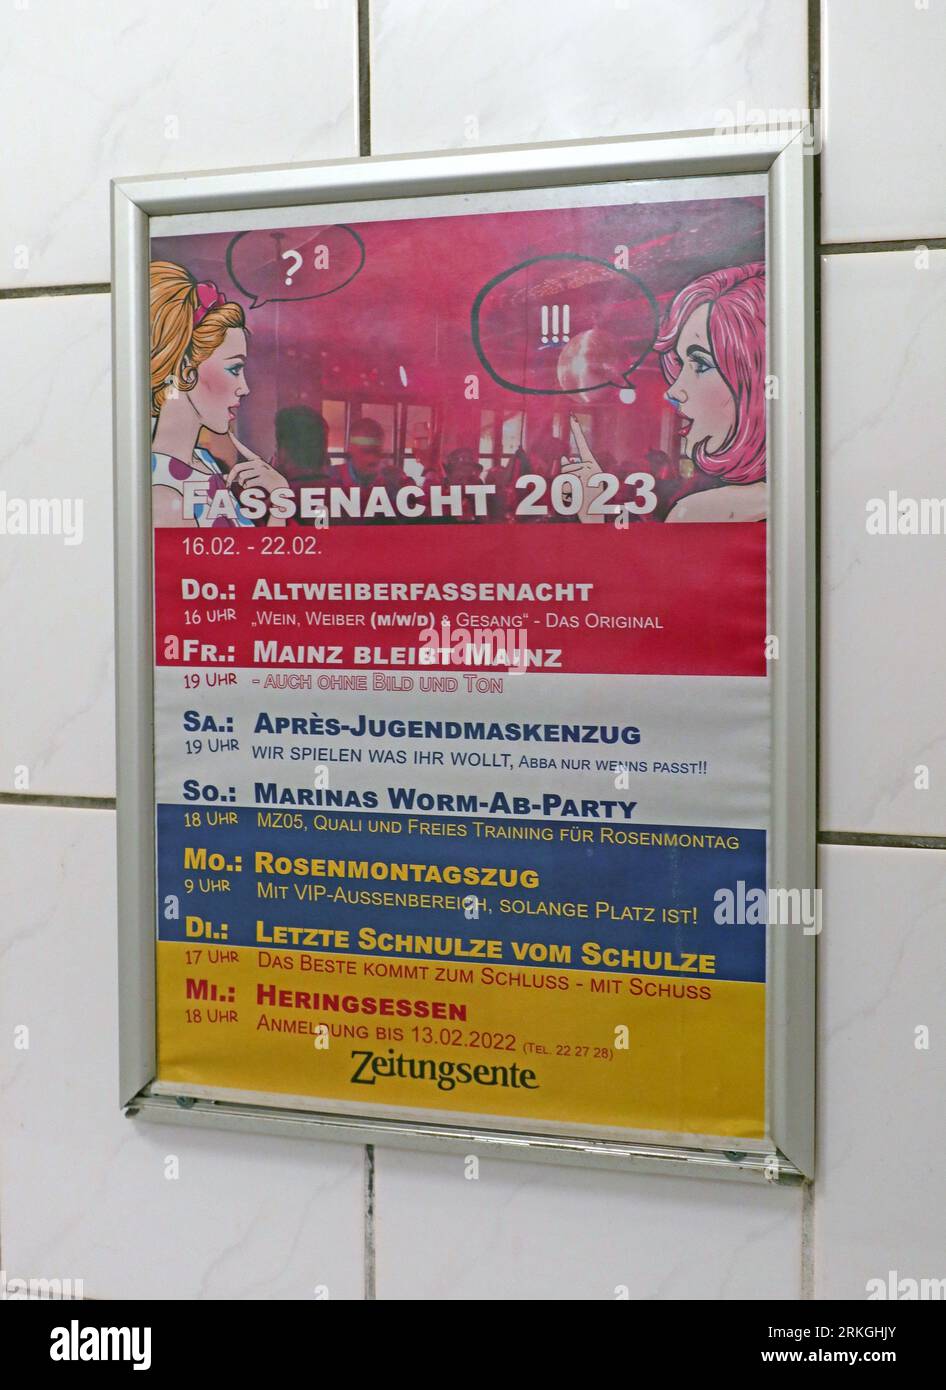 Timetable for Fastnacht 2023 in Mainz city, Germany, 16th February to Wednesday 22nd 2023 Stock Photo